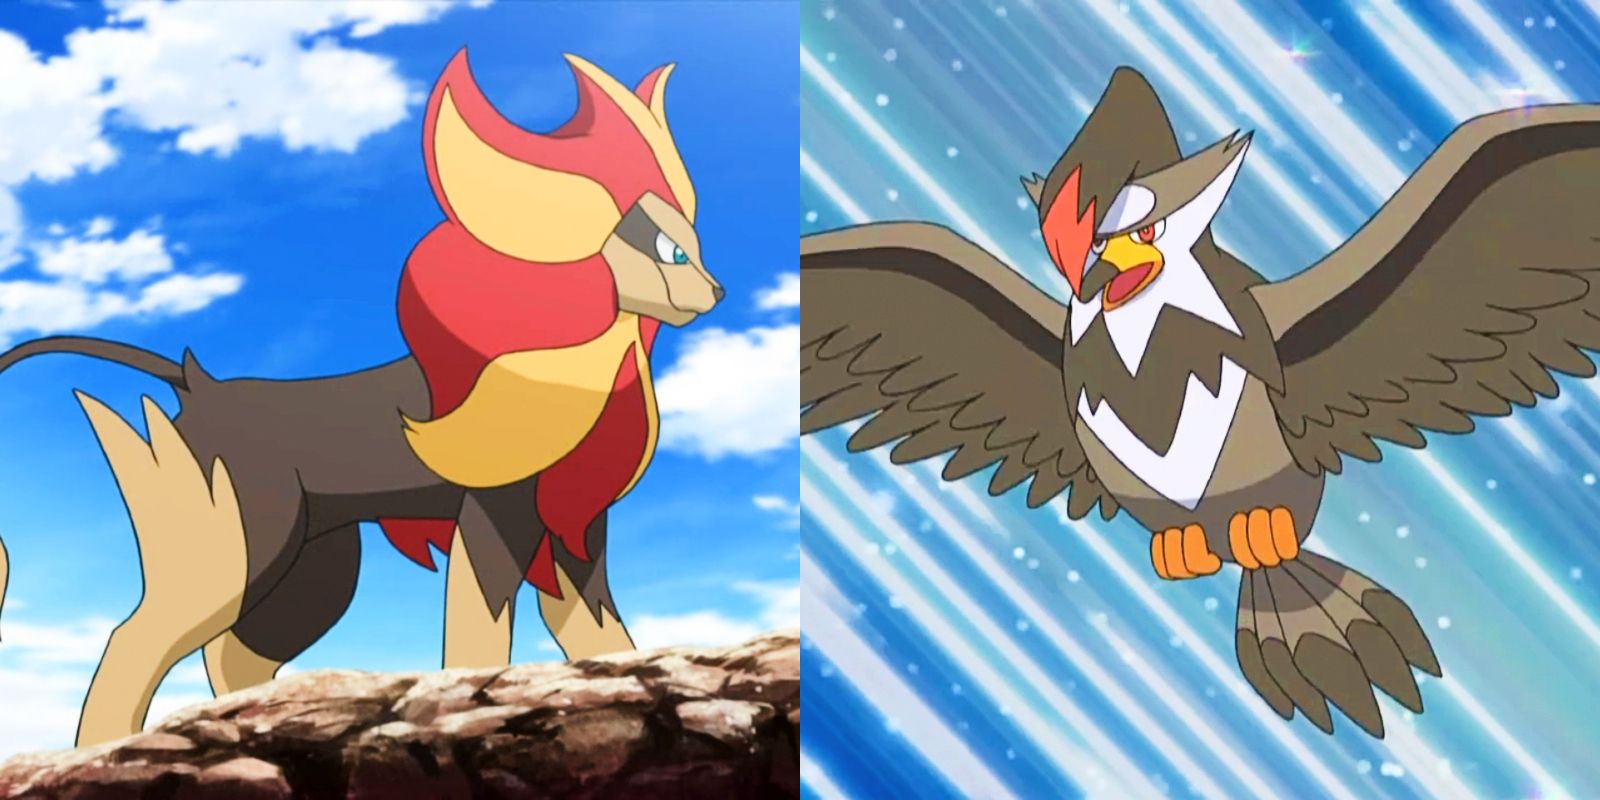 Split image: Pyroar stands on a cliff and Staraptor soars through the air in the Pokémon anime